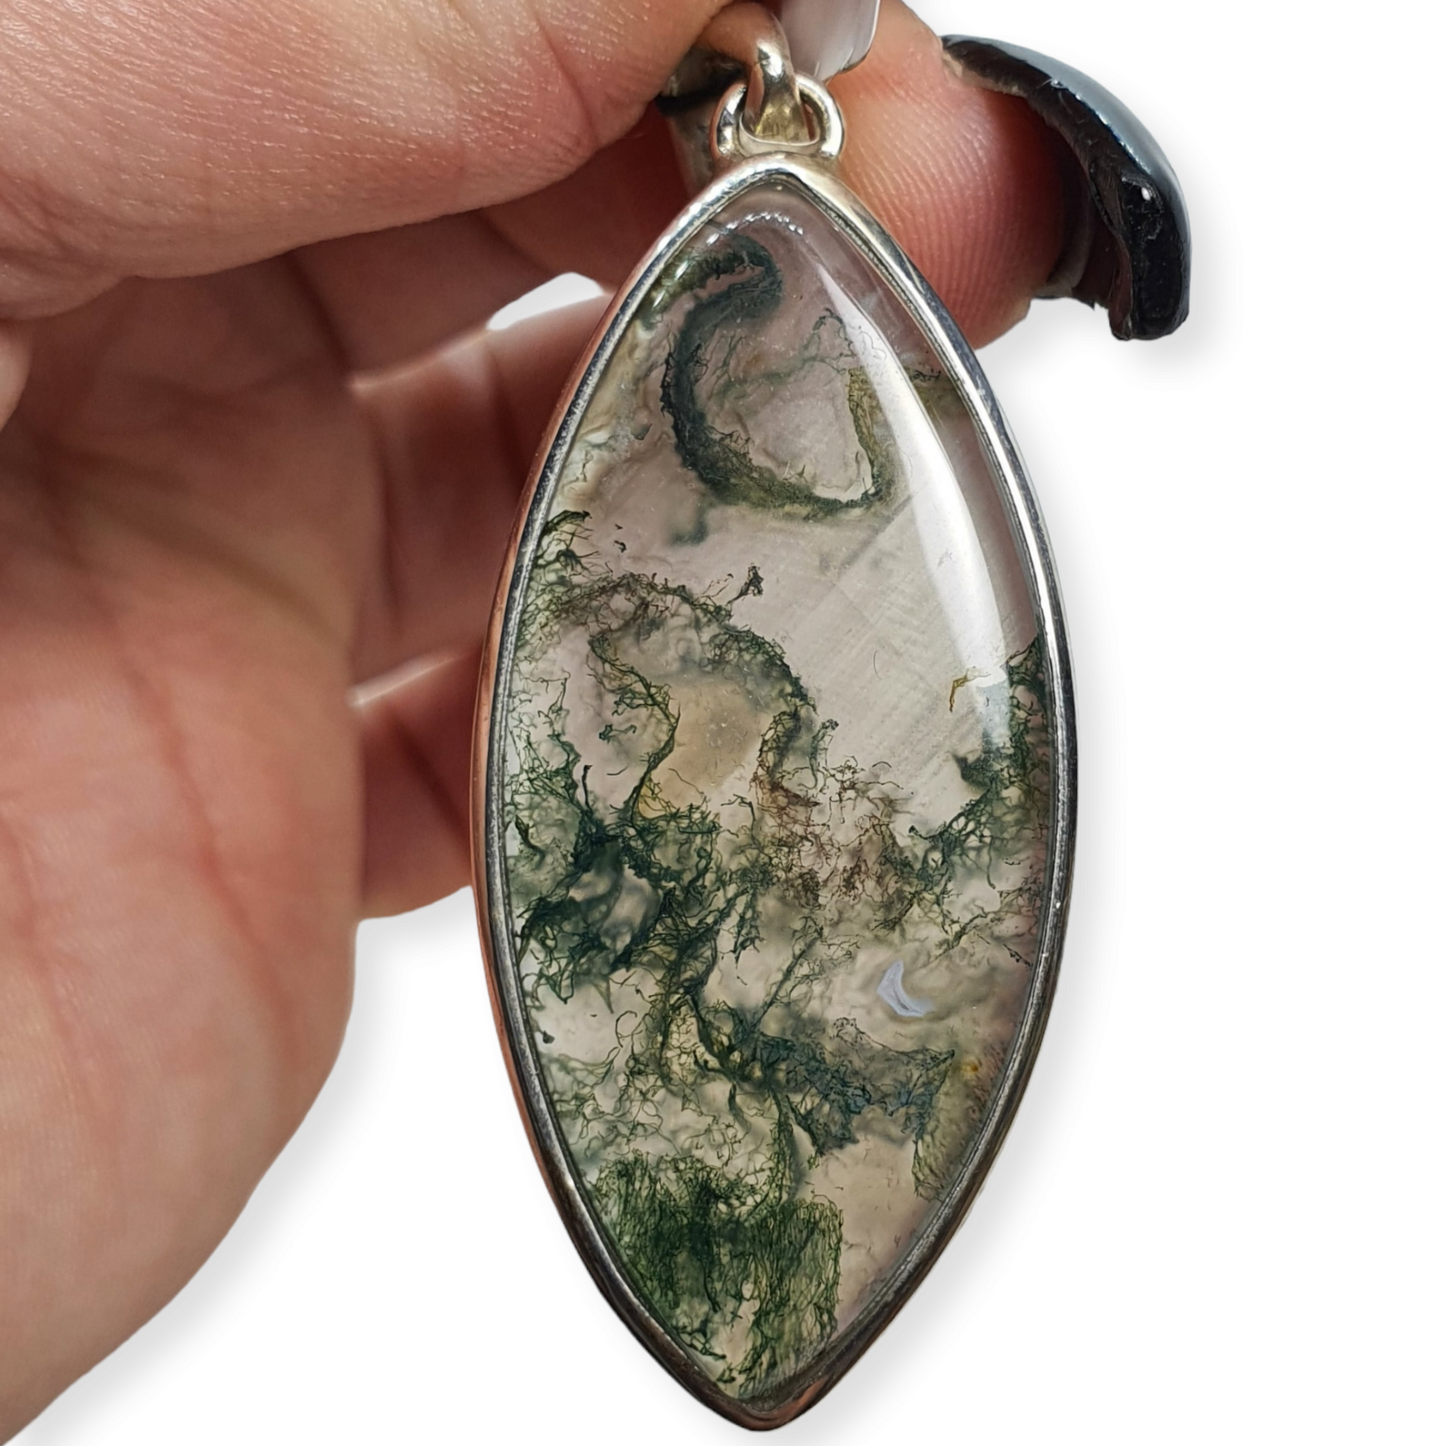 Crystals - Moss Agate Pendant - Sterling Silver